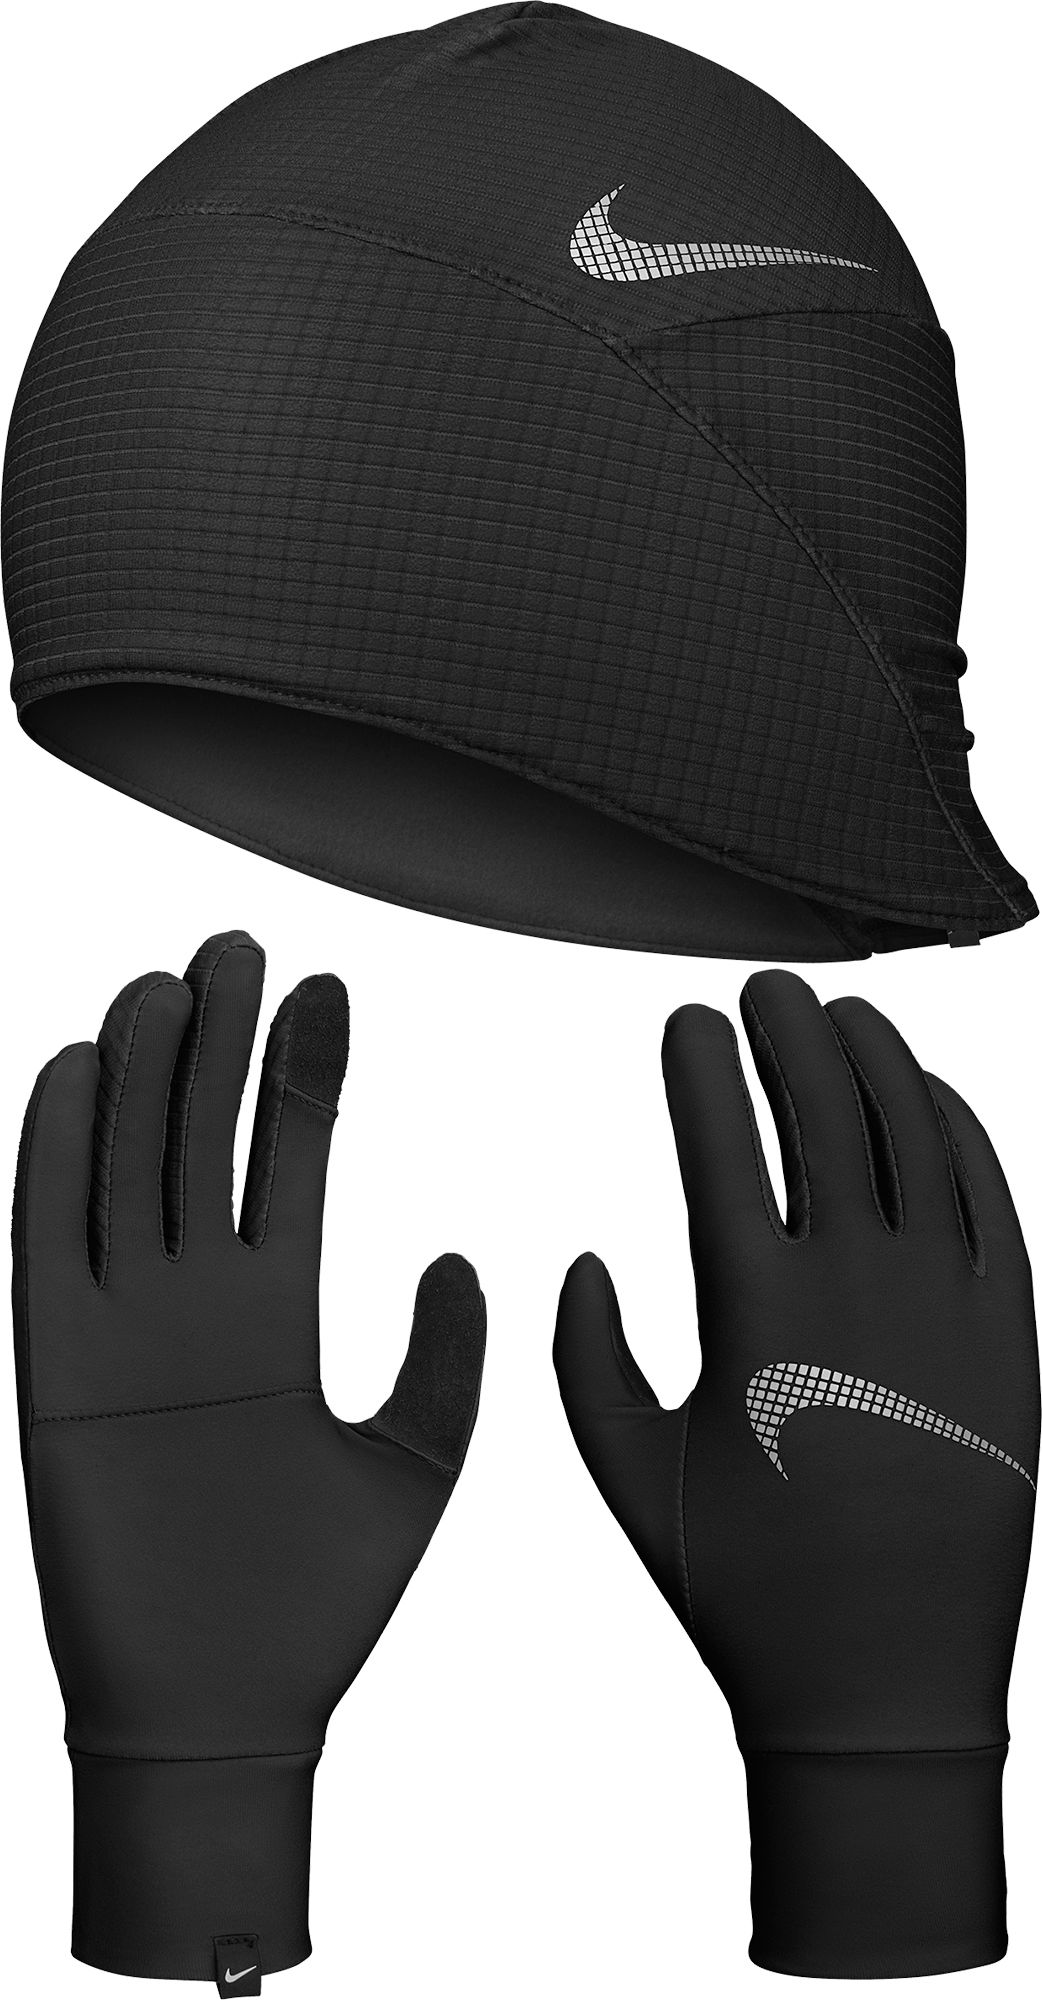 nike winter hat and gloves